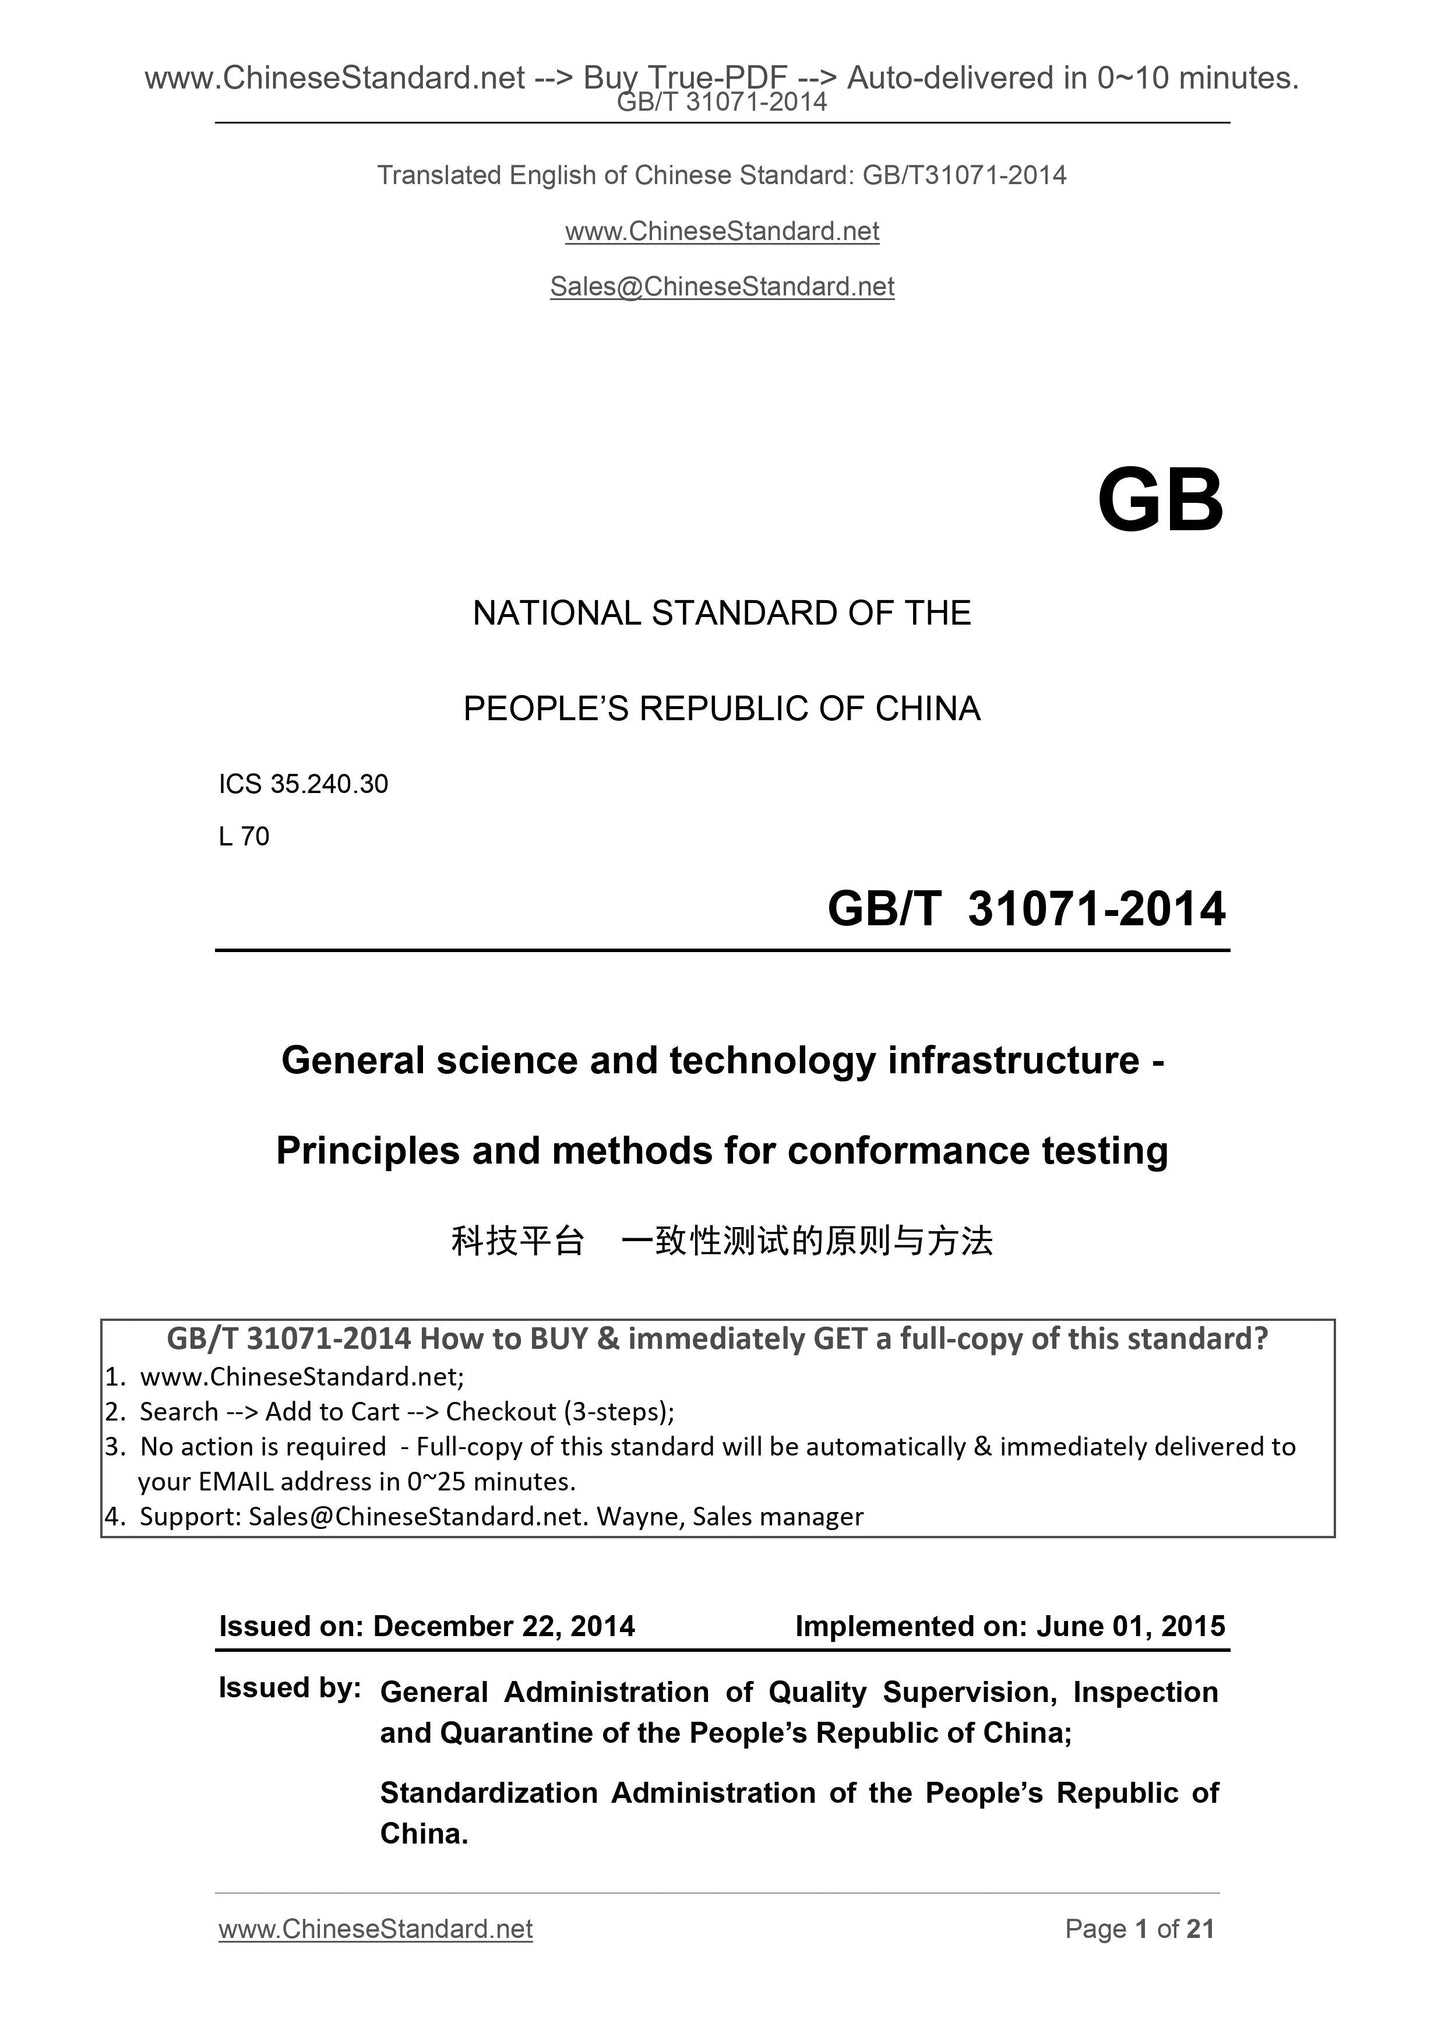 GB/T 31071-2014 Page 1